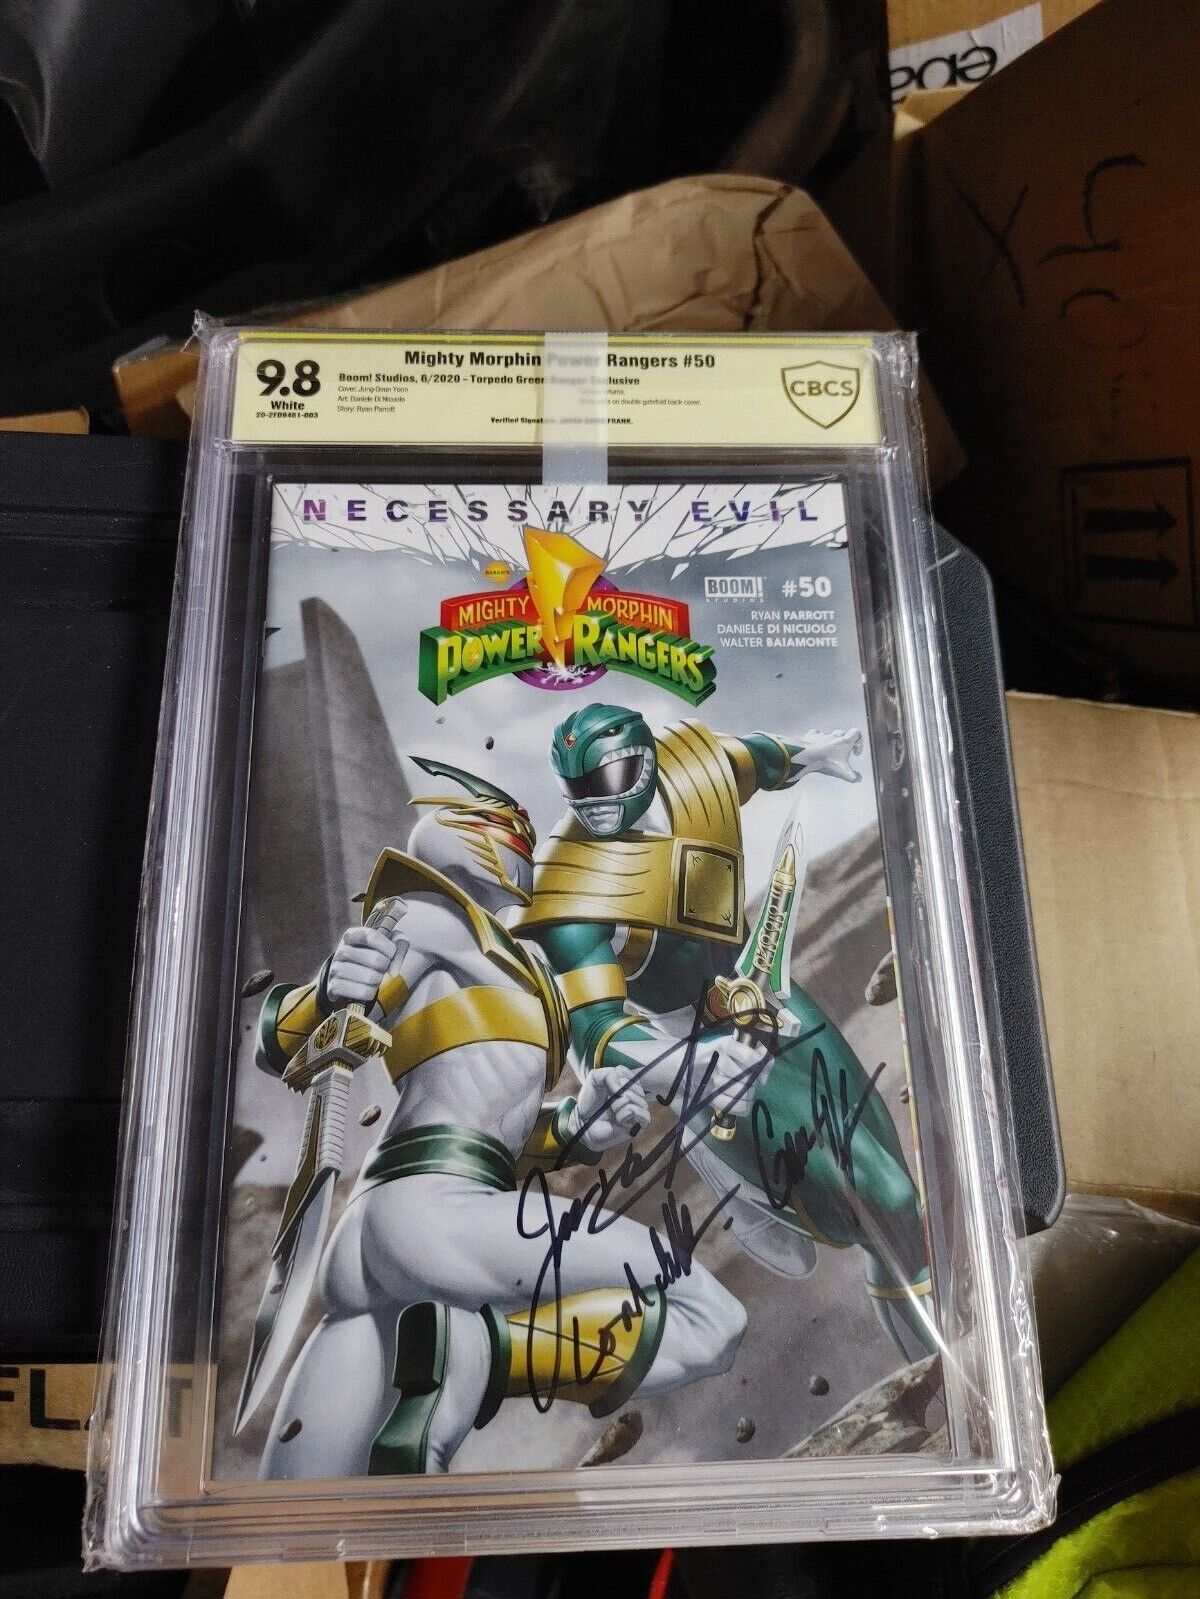 Mighty Morphin Power Rangers #50 Torpedo Exclusive signed by Jason David Frank